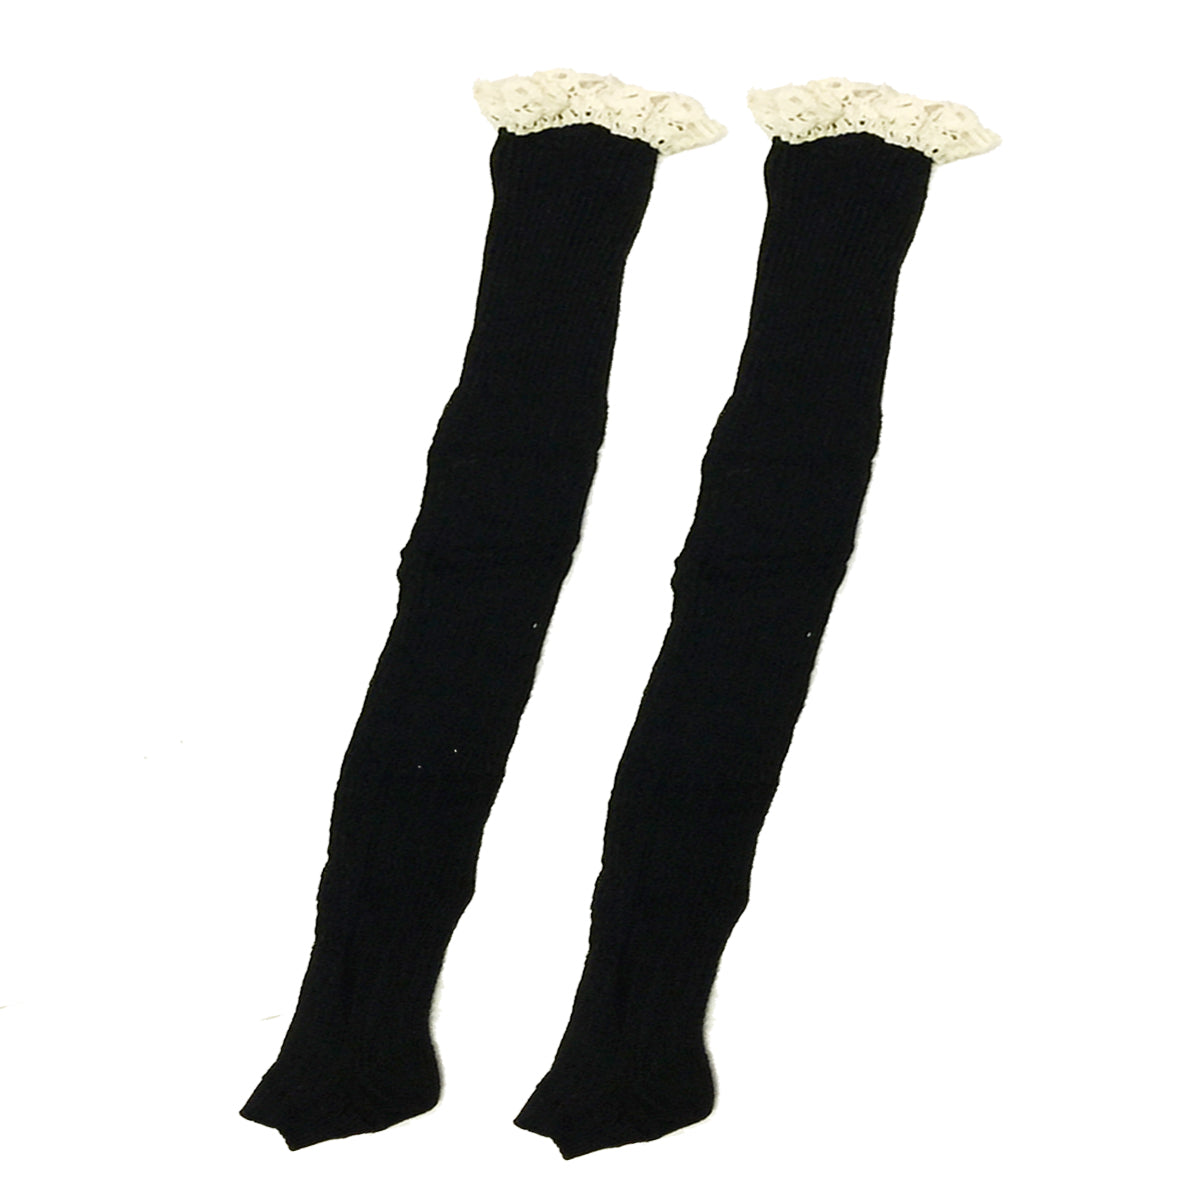 Wrapables Knitted Leg Warmers Boot Socks with Lace Trim